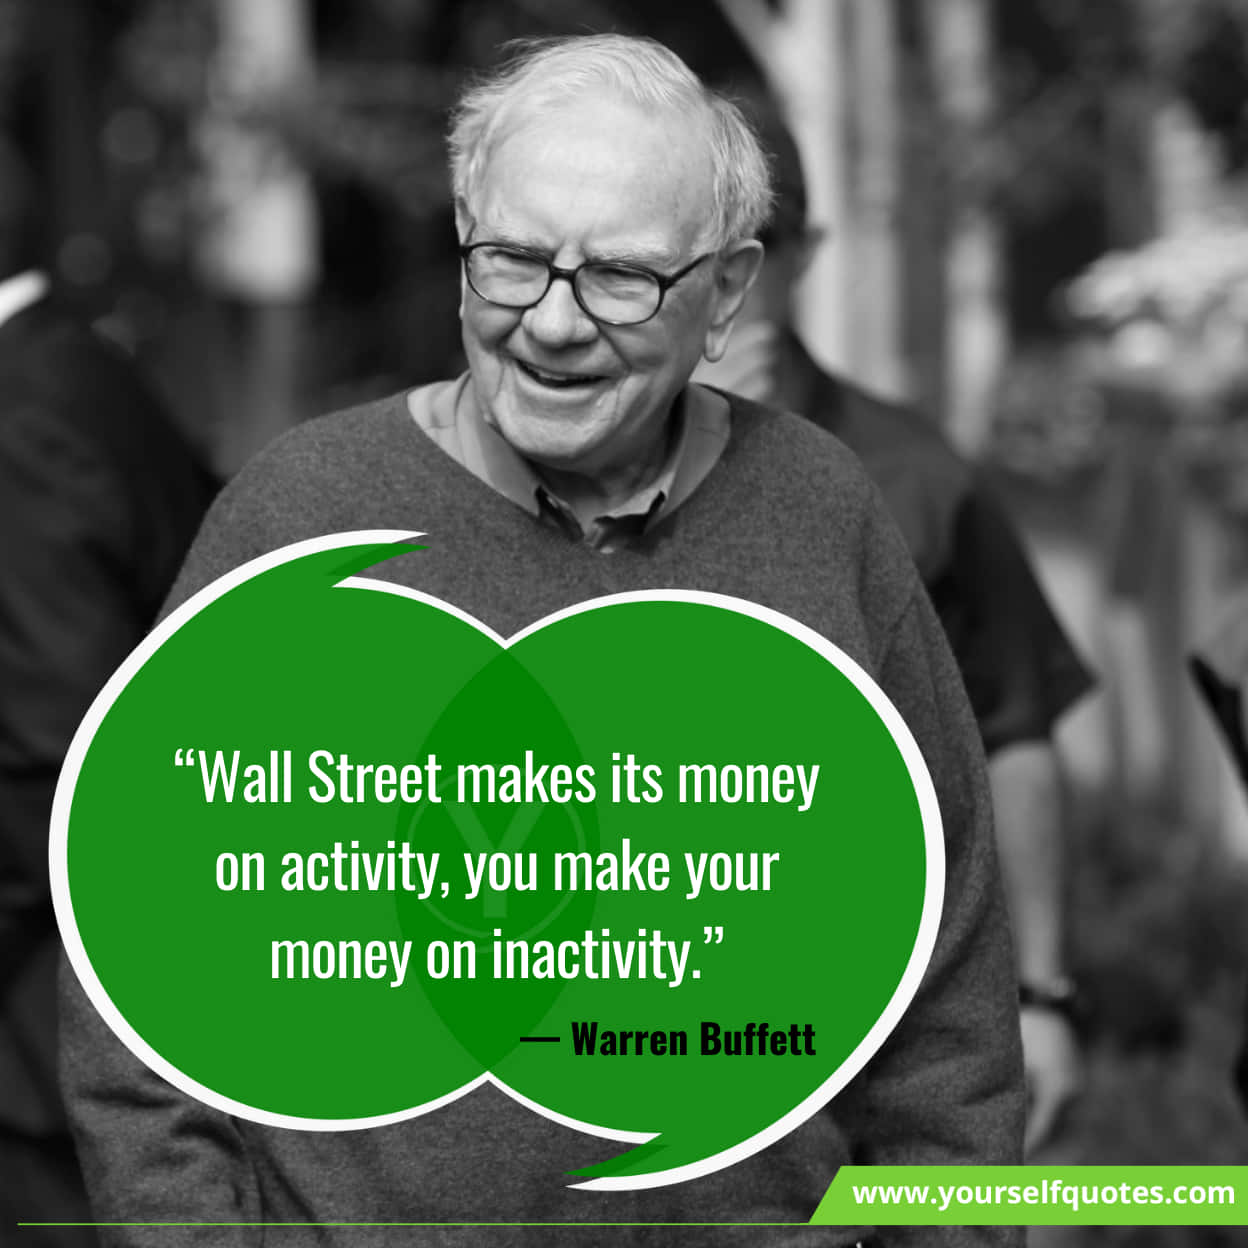 Famous Quotes Stock Market Latest